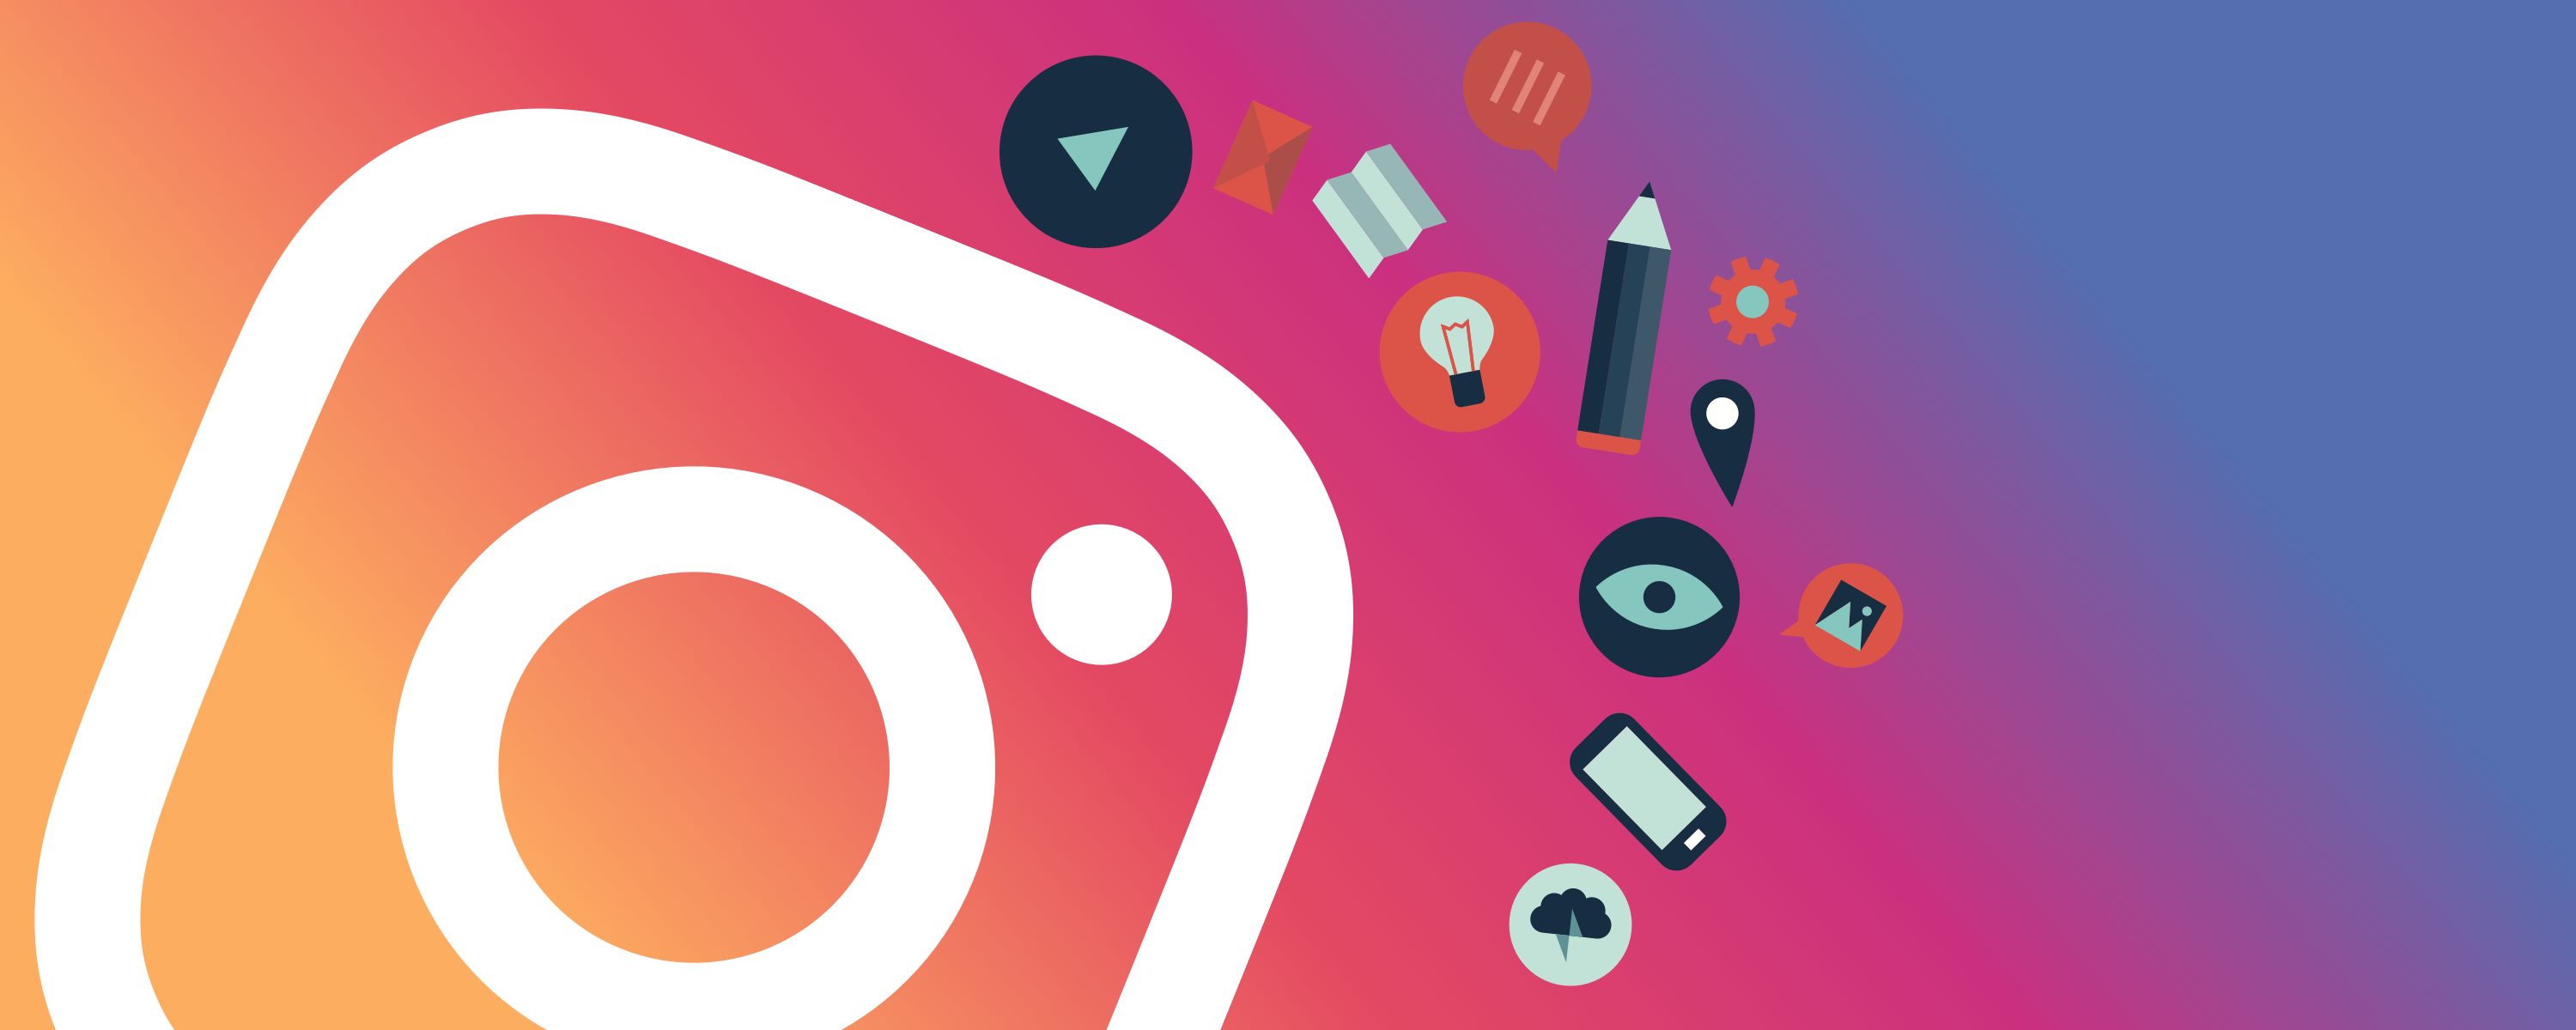 How to Buy Instagram followers Australia to Grow Your Account